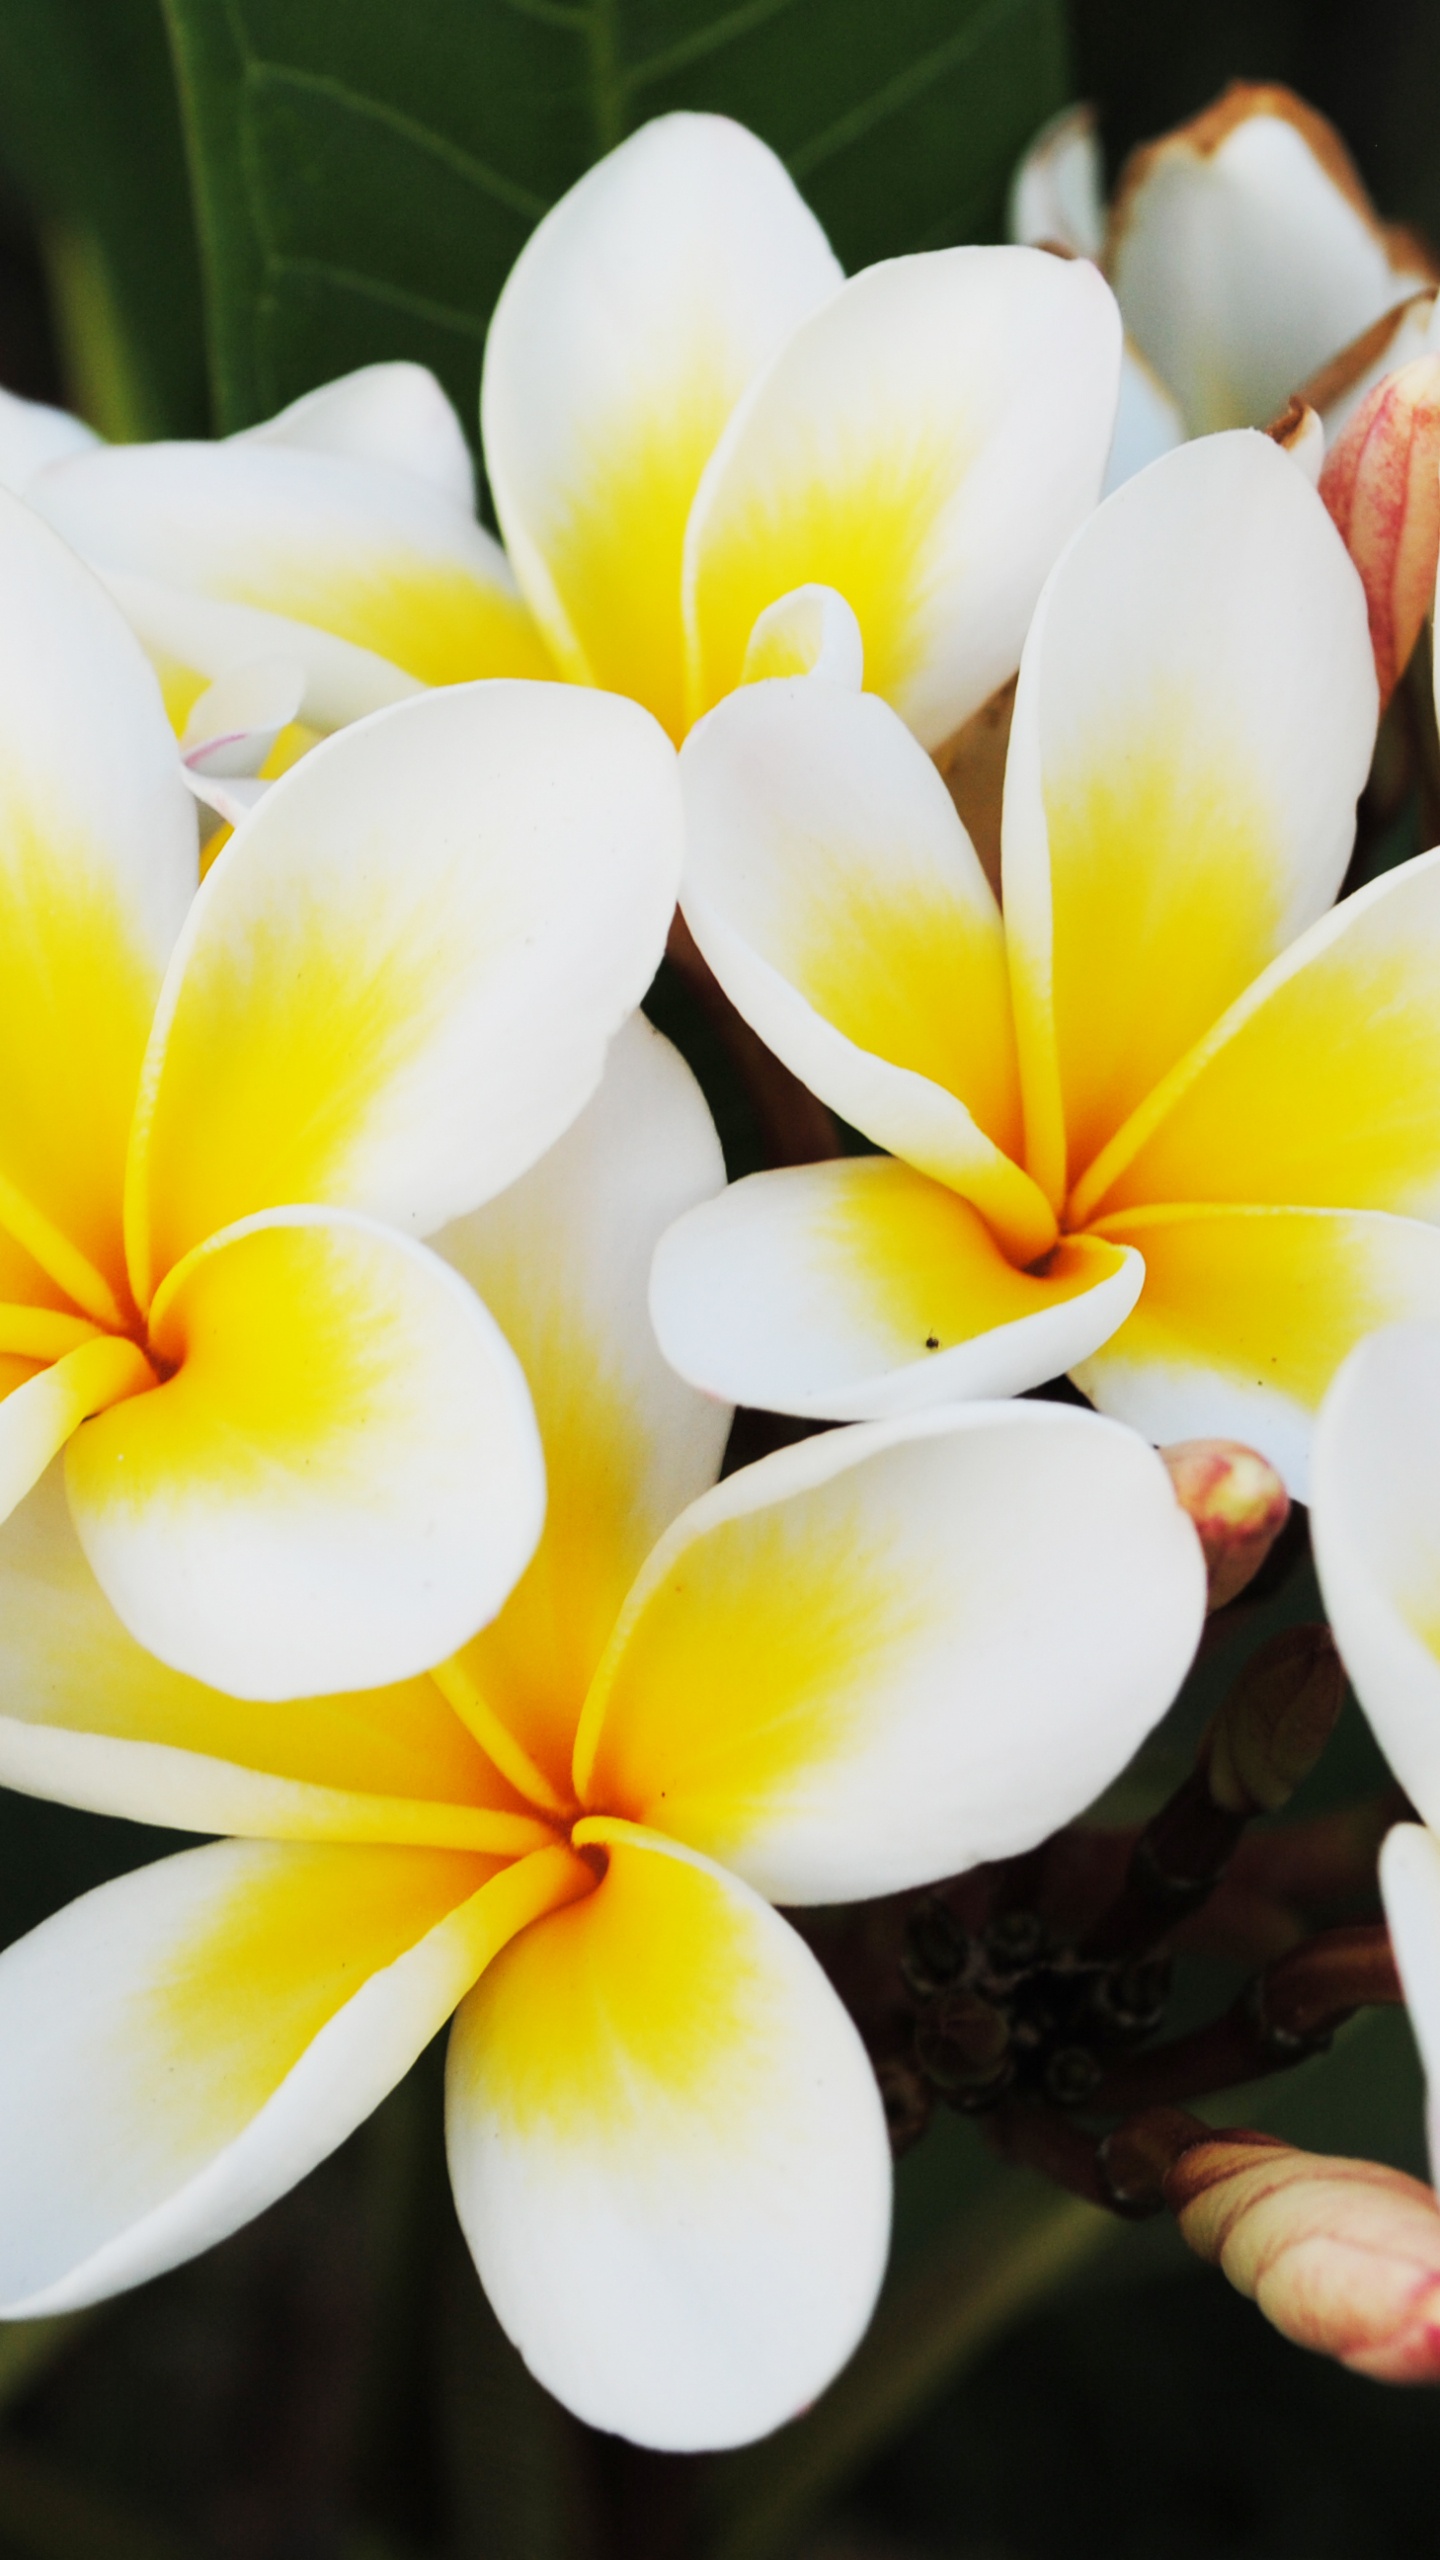 White and Yellow Flower in Close up Photography. Wallpaper in 1440x2560 Resolution